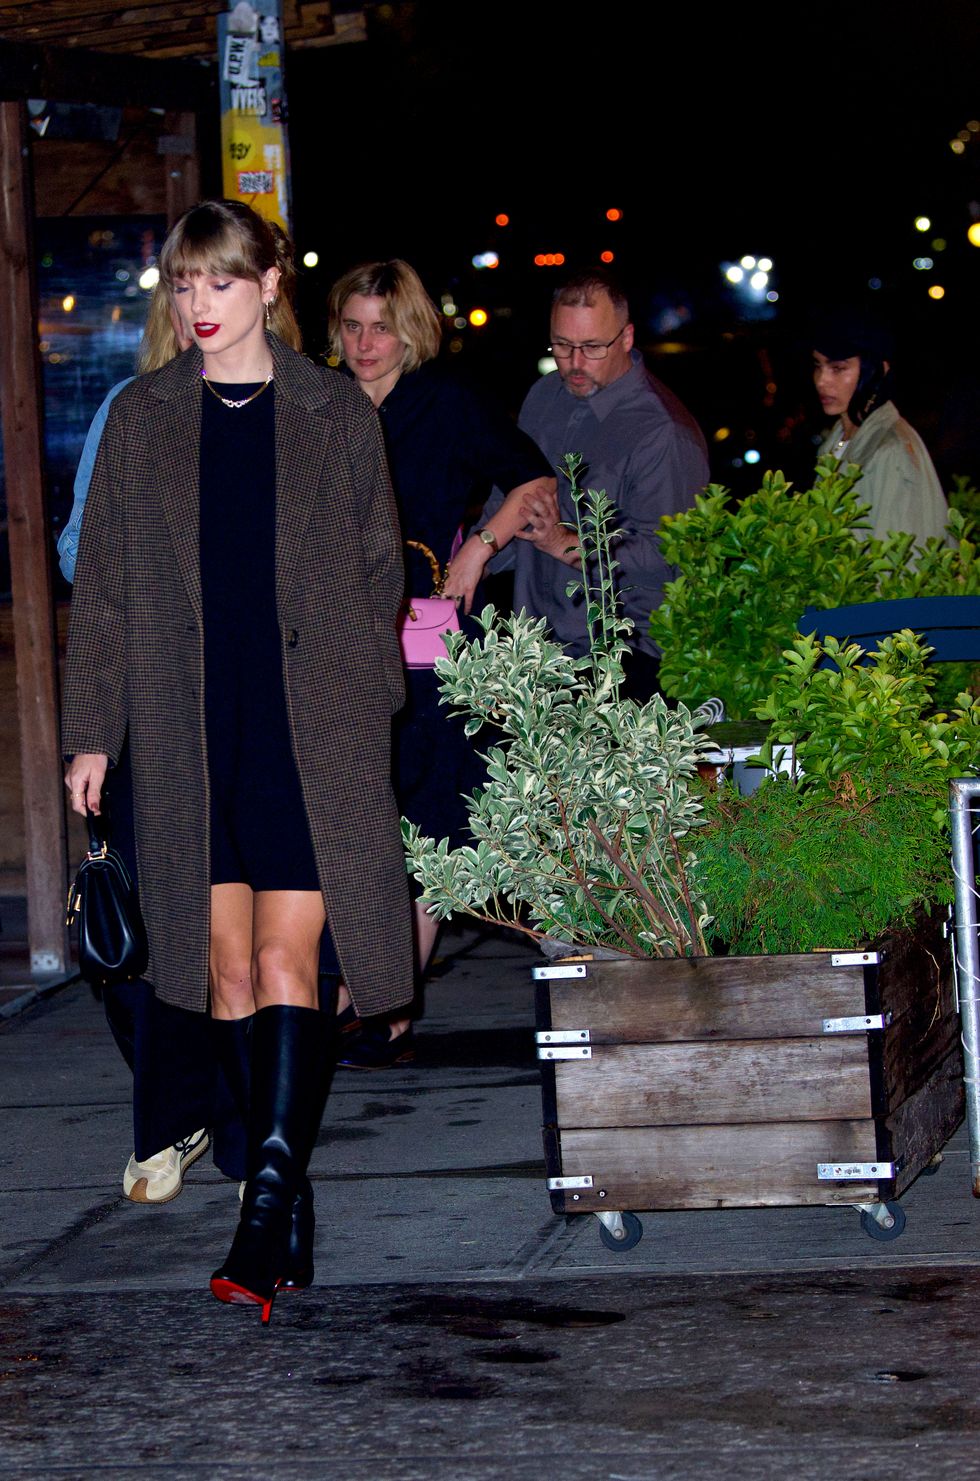 Taylor Swift Steps Out With Her Squad in Christian Louboutin